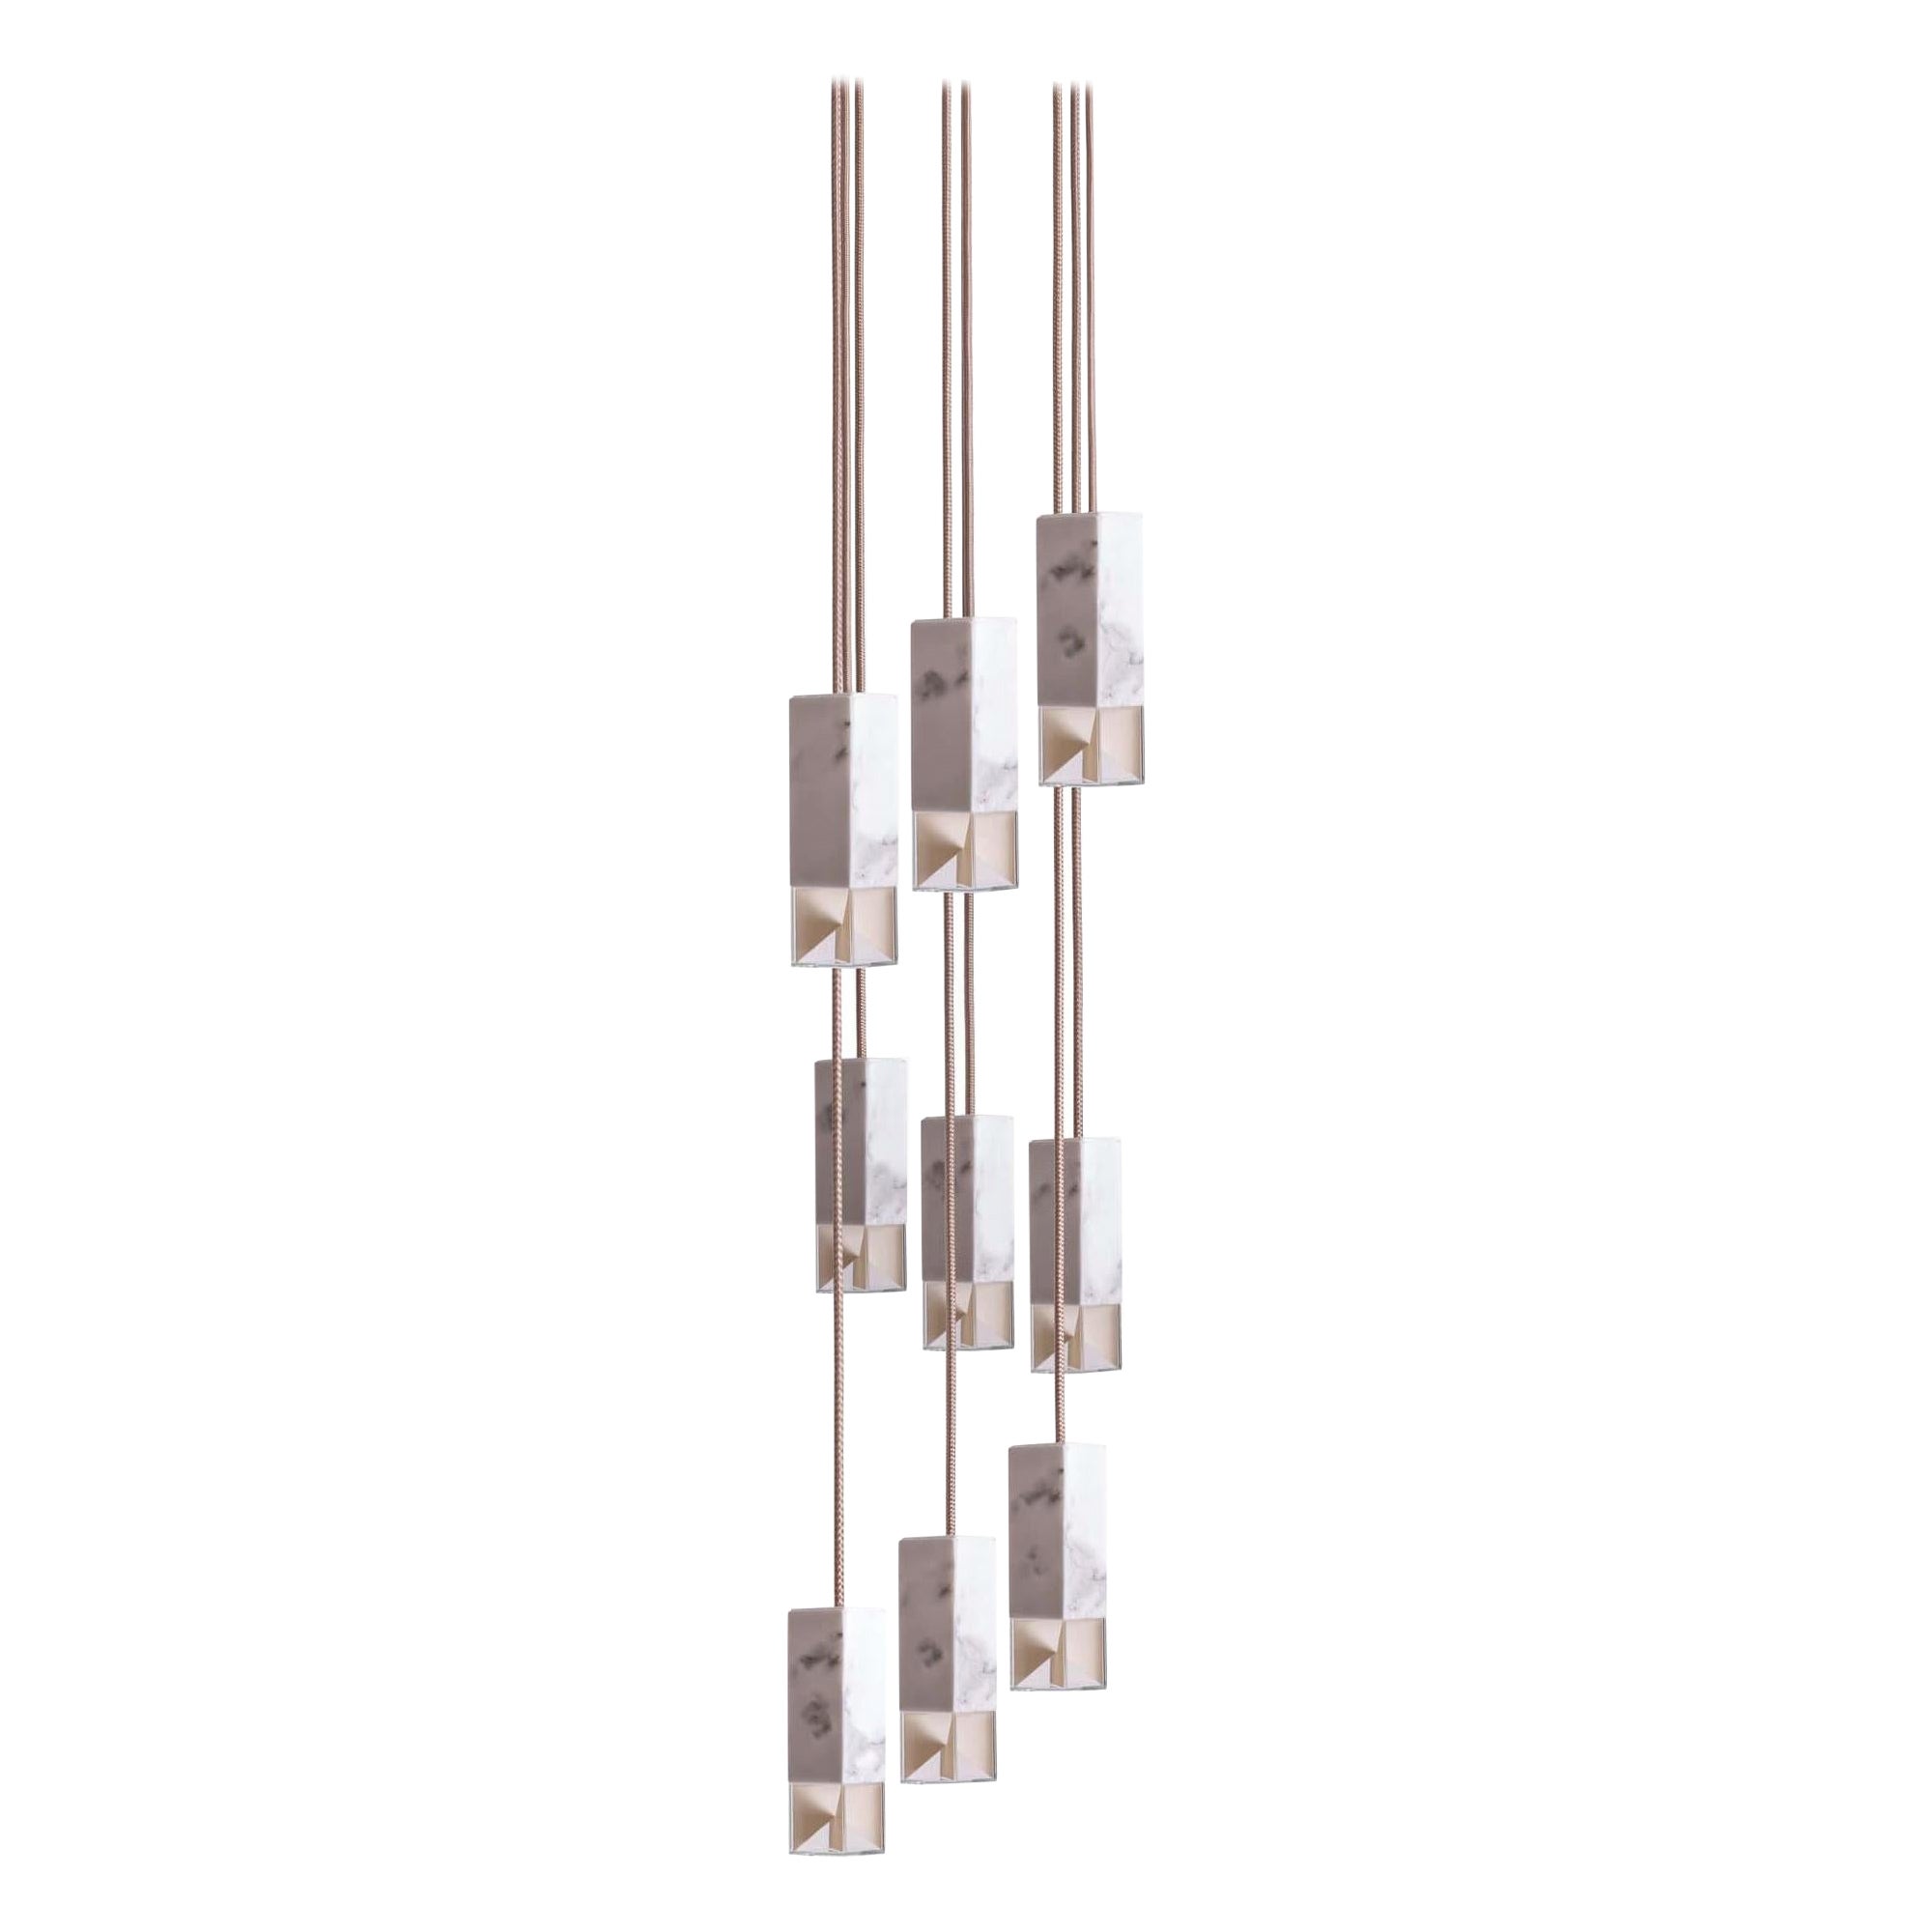 Lamp One 9-Light Chandelier in Marble by Formaminima